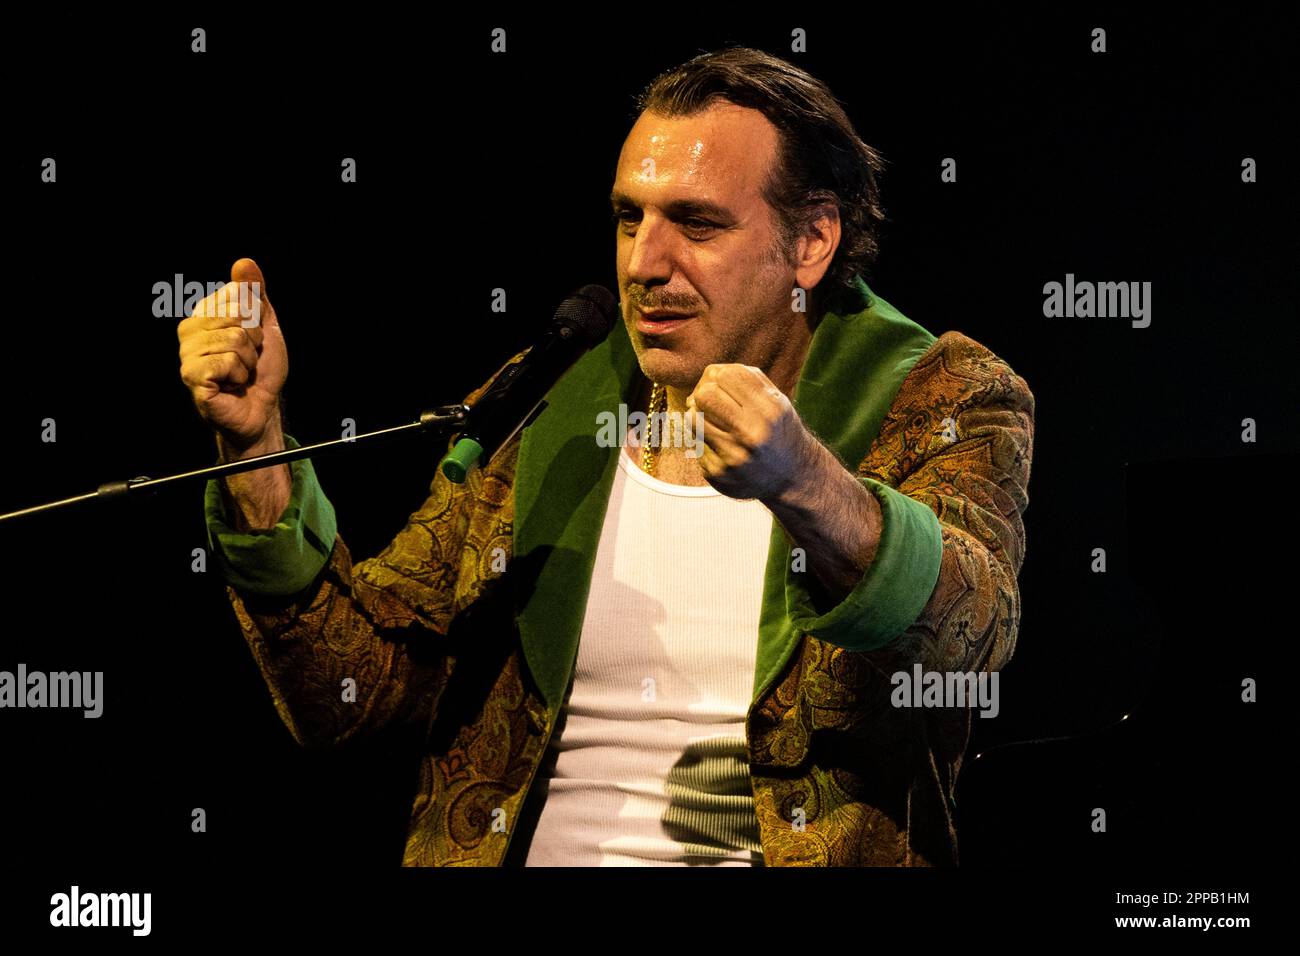 Canadian musician, songwriter, and producer Chilly Gonzales in concert at Teatro Lirico Giorgio GaberCanadian musician, songwriter, and producer Chilly Gonzales in concert at Teatro Lirico Giorgio Gaber Stock Photo